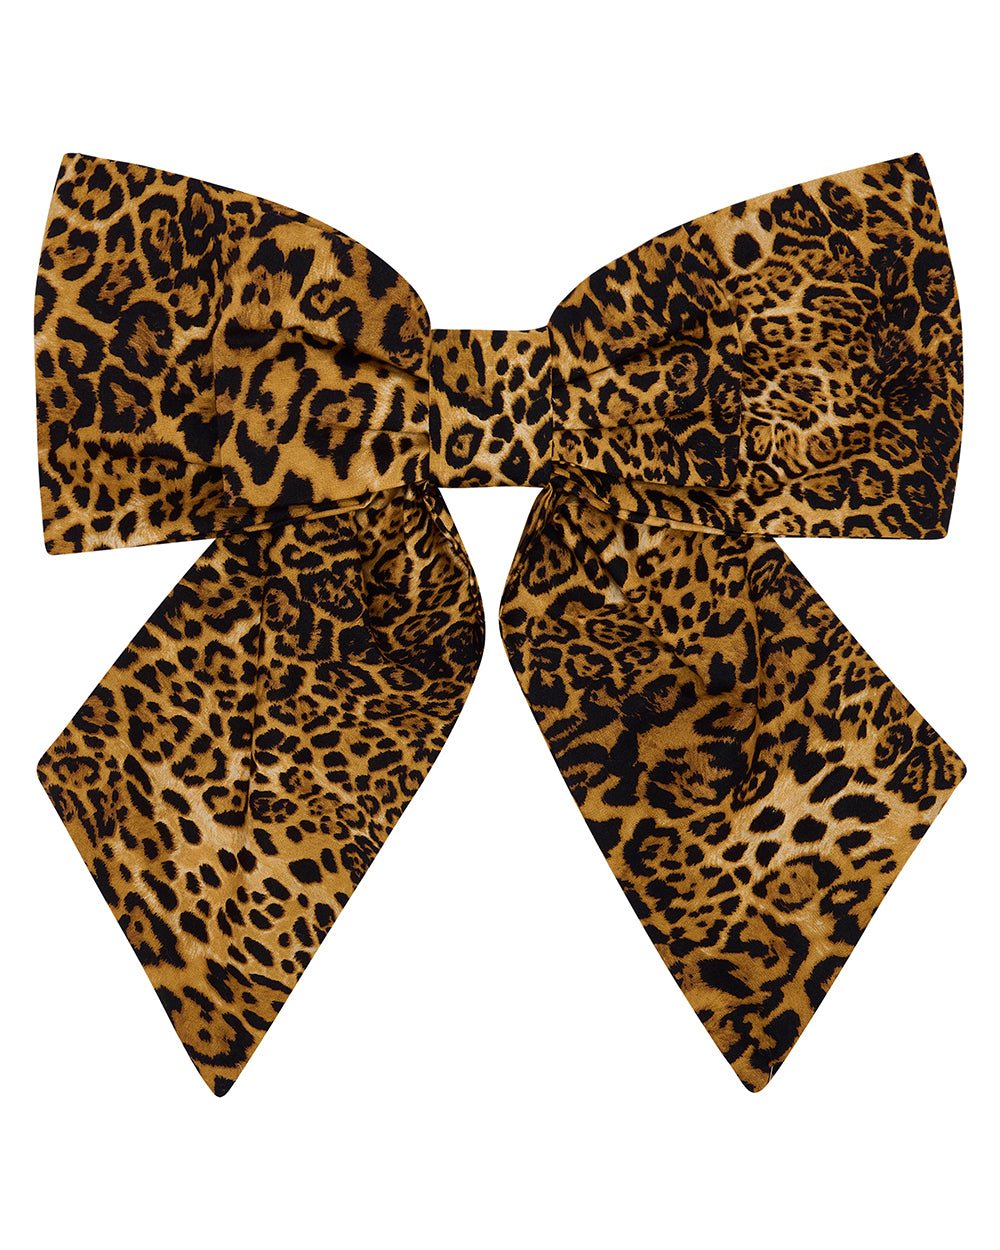 XL OVERSIZED BOW ✿ in Leopard Print Cotton